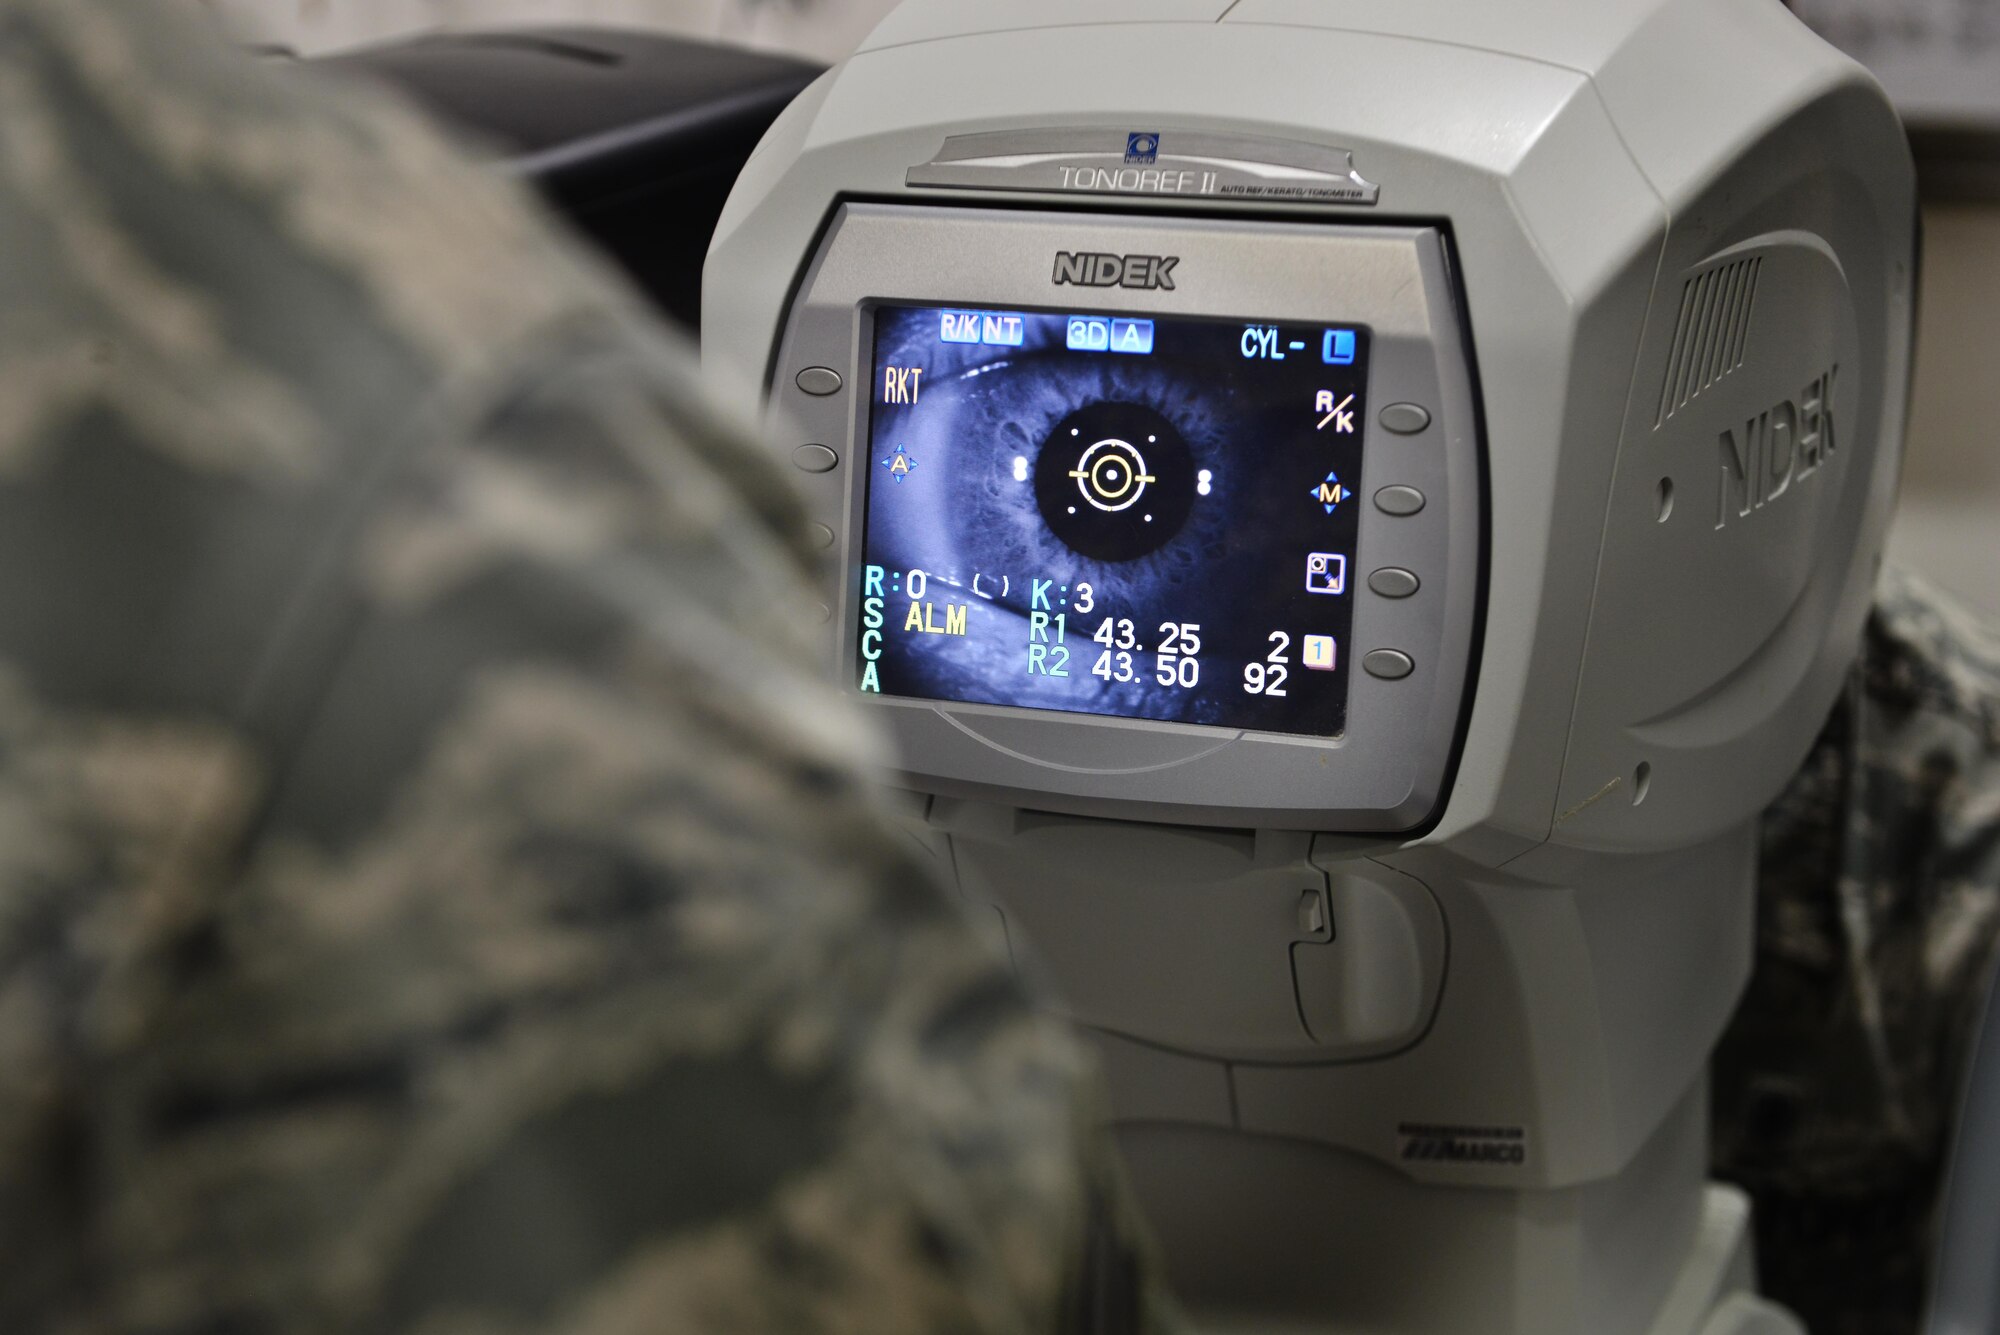 Senior Airman Adlai Ceja, 379th Expeditionary Medical Group optometry clinic, uses a tonometer to blow a small amount of air into a patient’s eye to check its fluid pressure August 7, 2015 at Al Udeid Air Base, Qatar. (U.S. Air Force photo/Staff Sgt. Alexandre Montes)